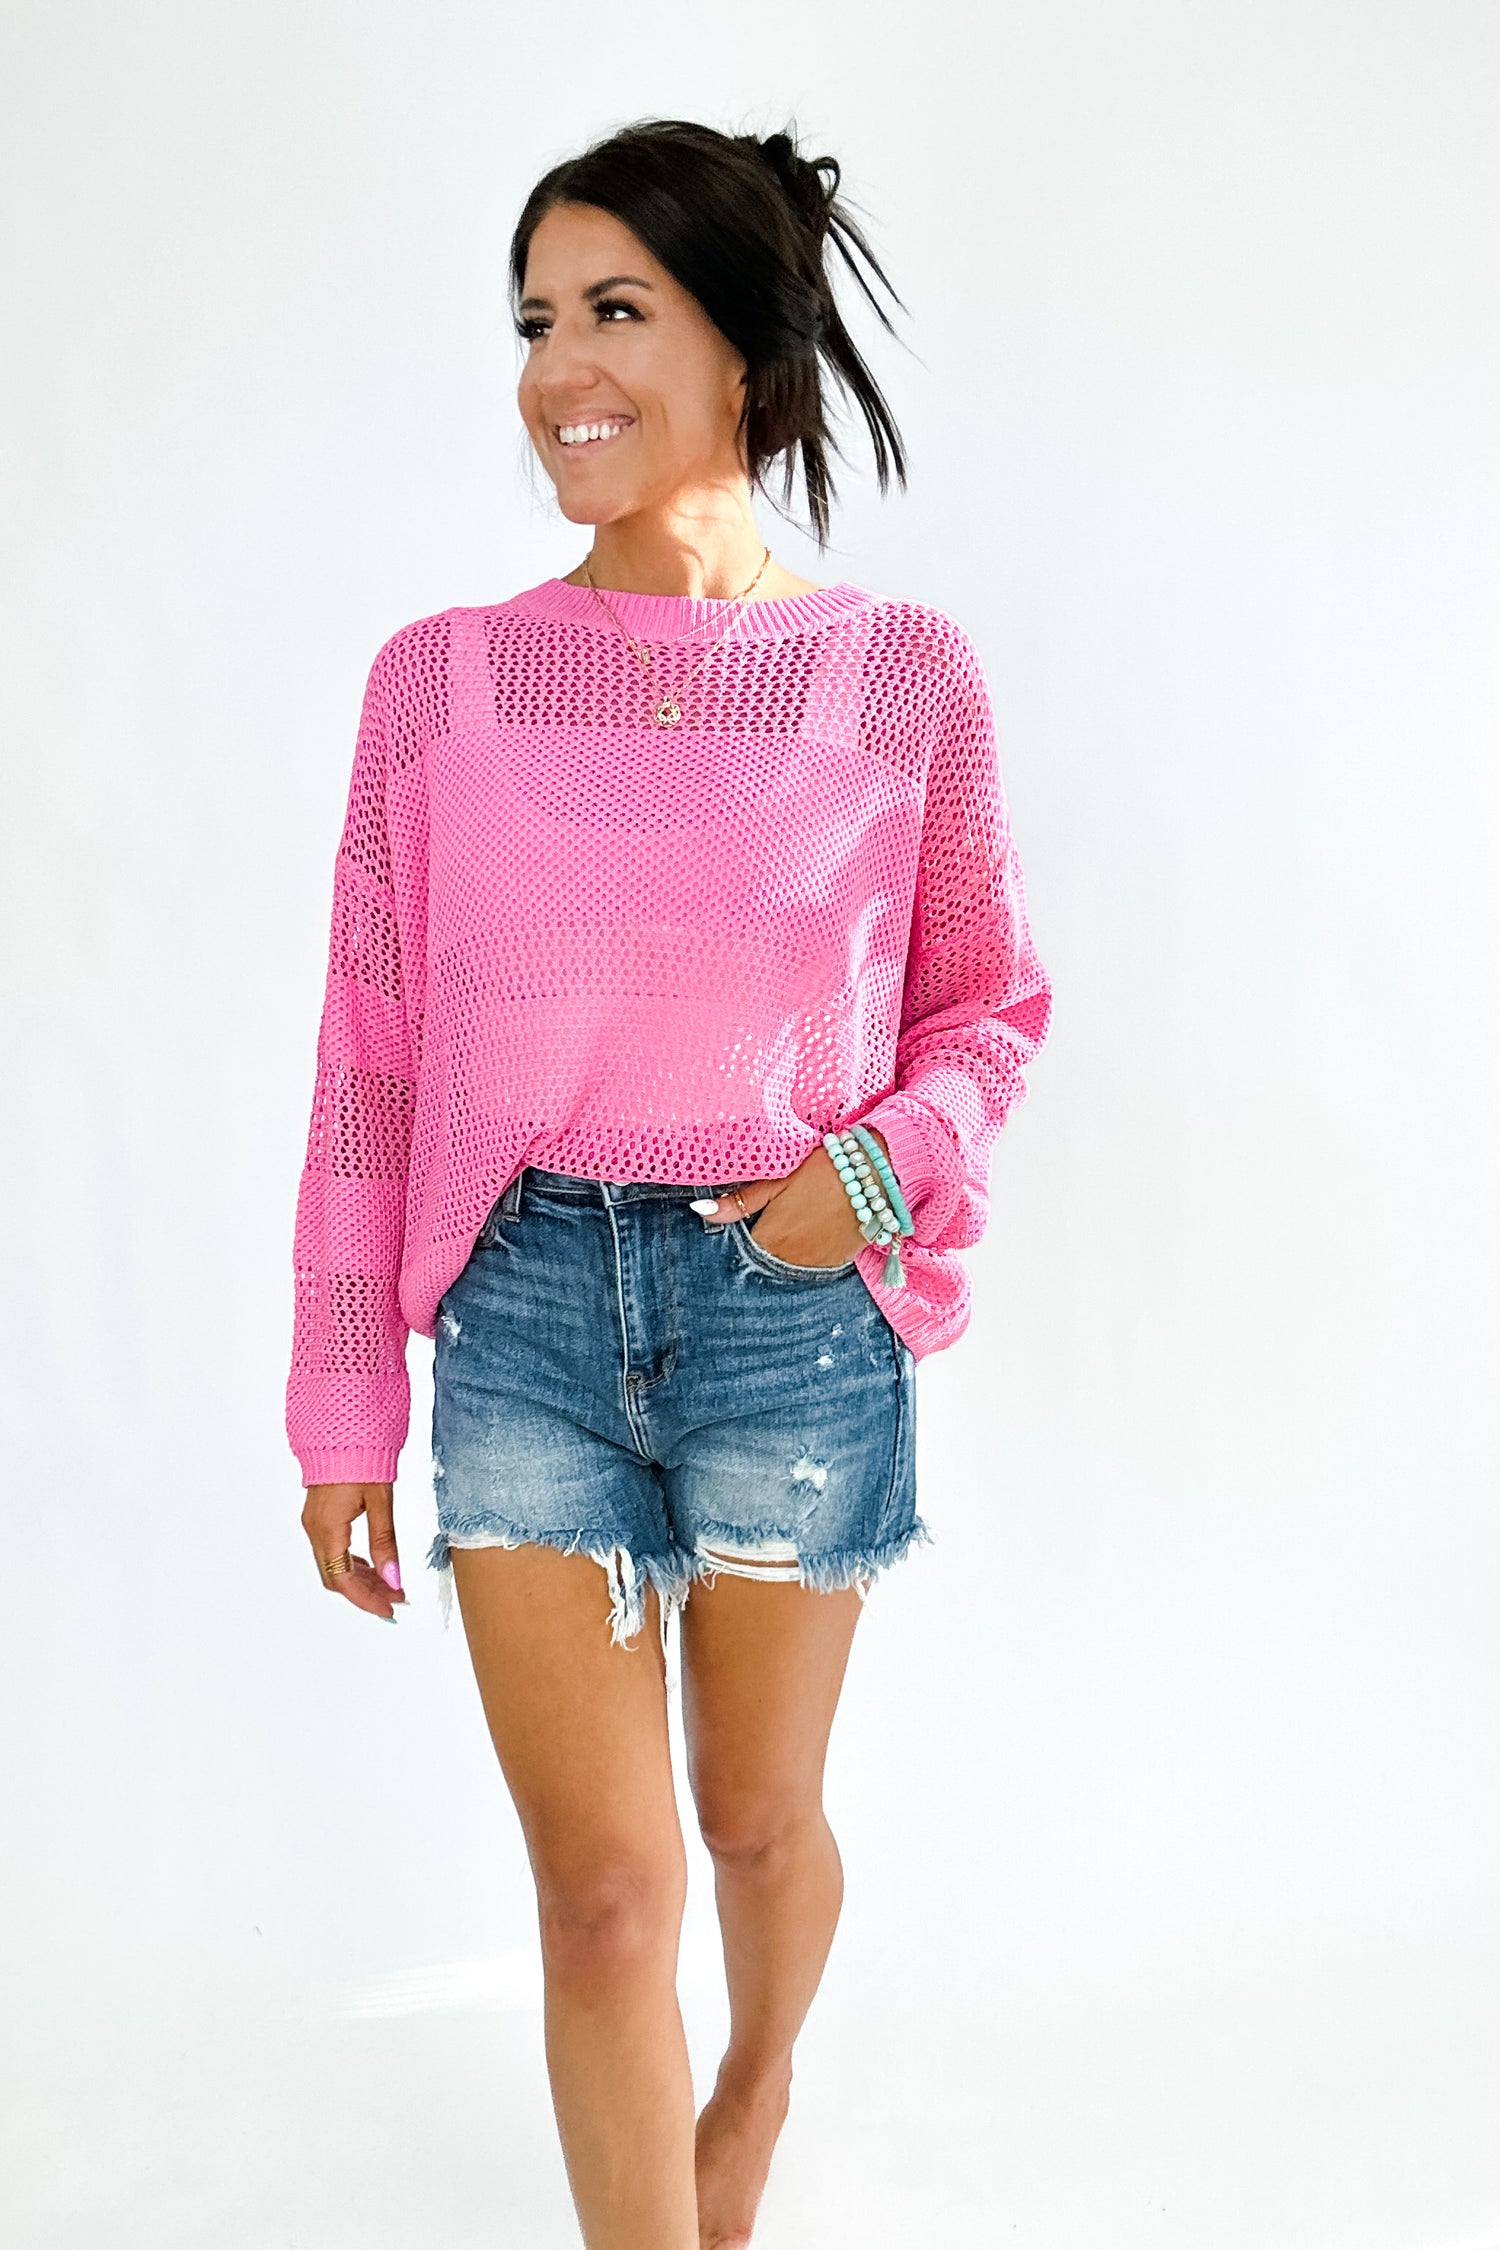 FISHNET LIGHT SWEATER IN HOT PINK